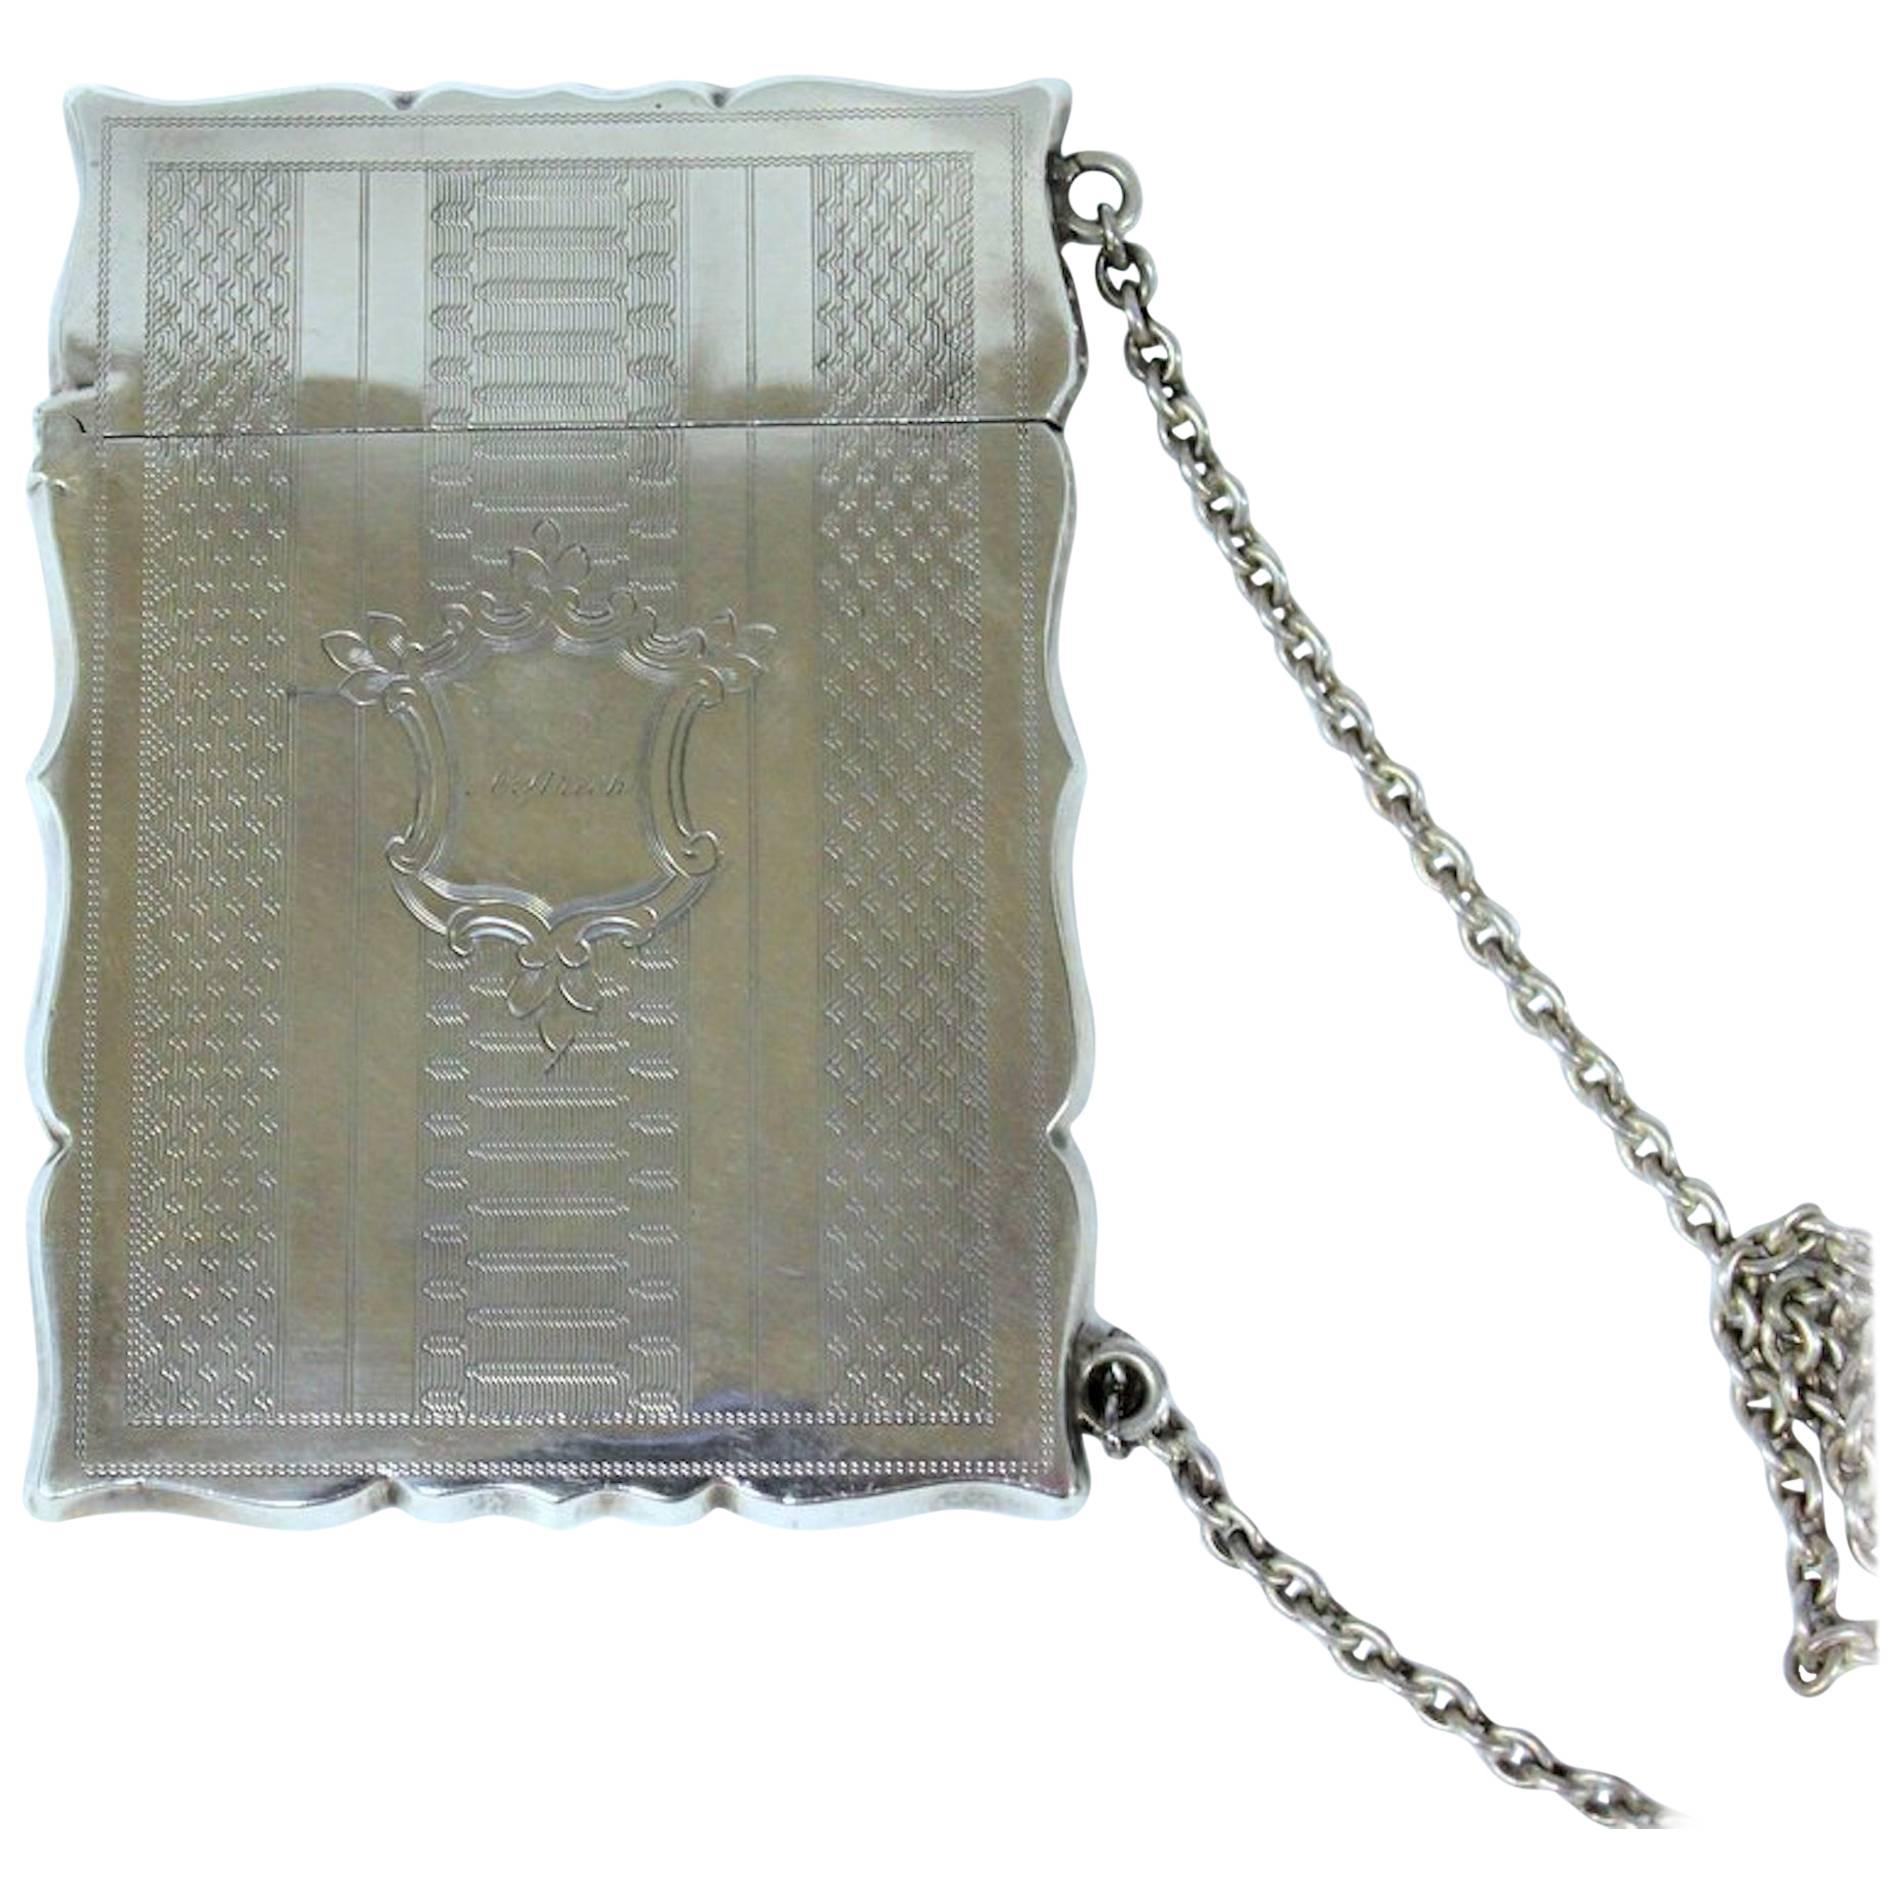 Antique American Coin Silver Hand Engraved Card Case with Chatelaine